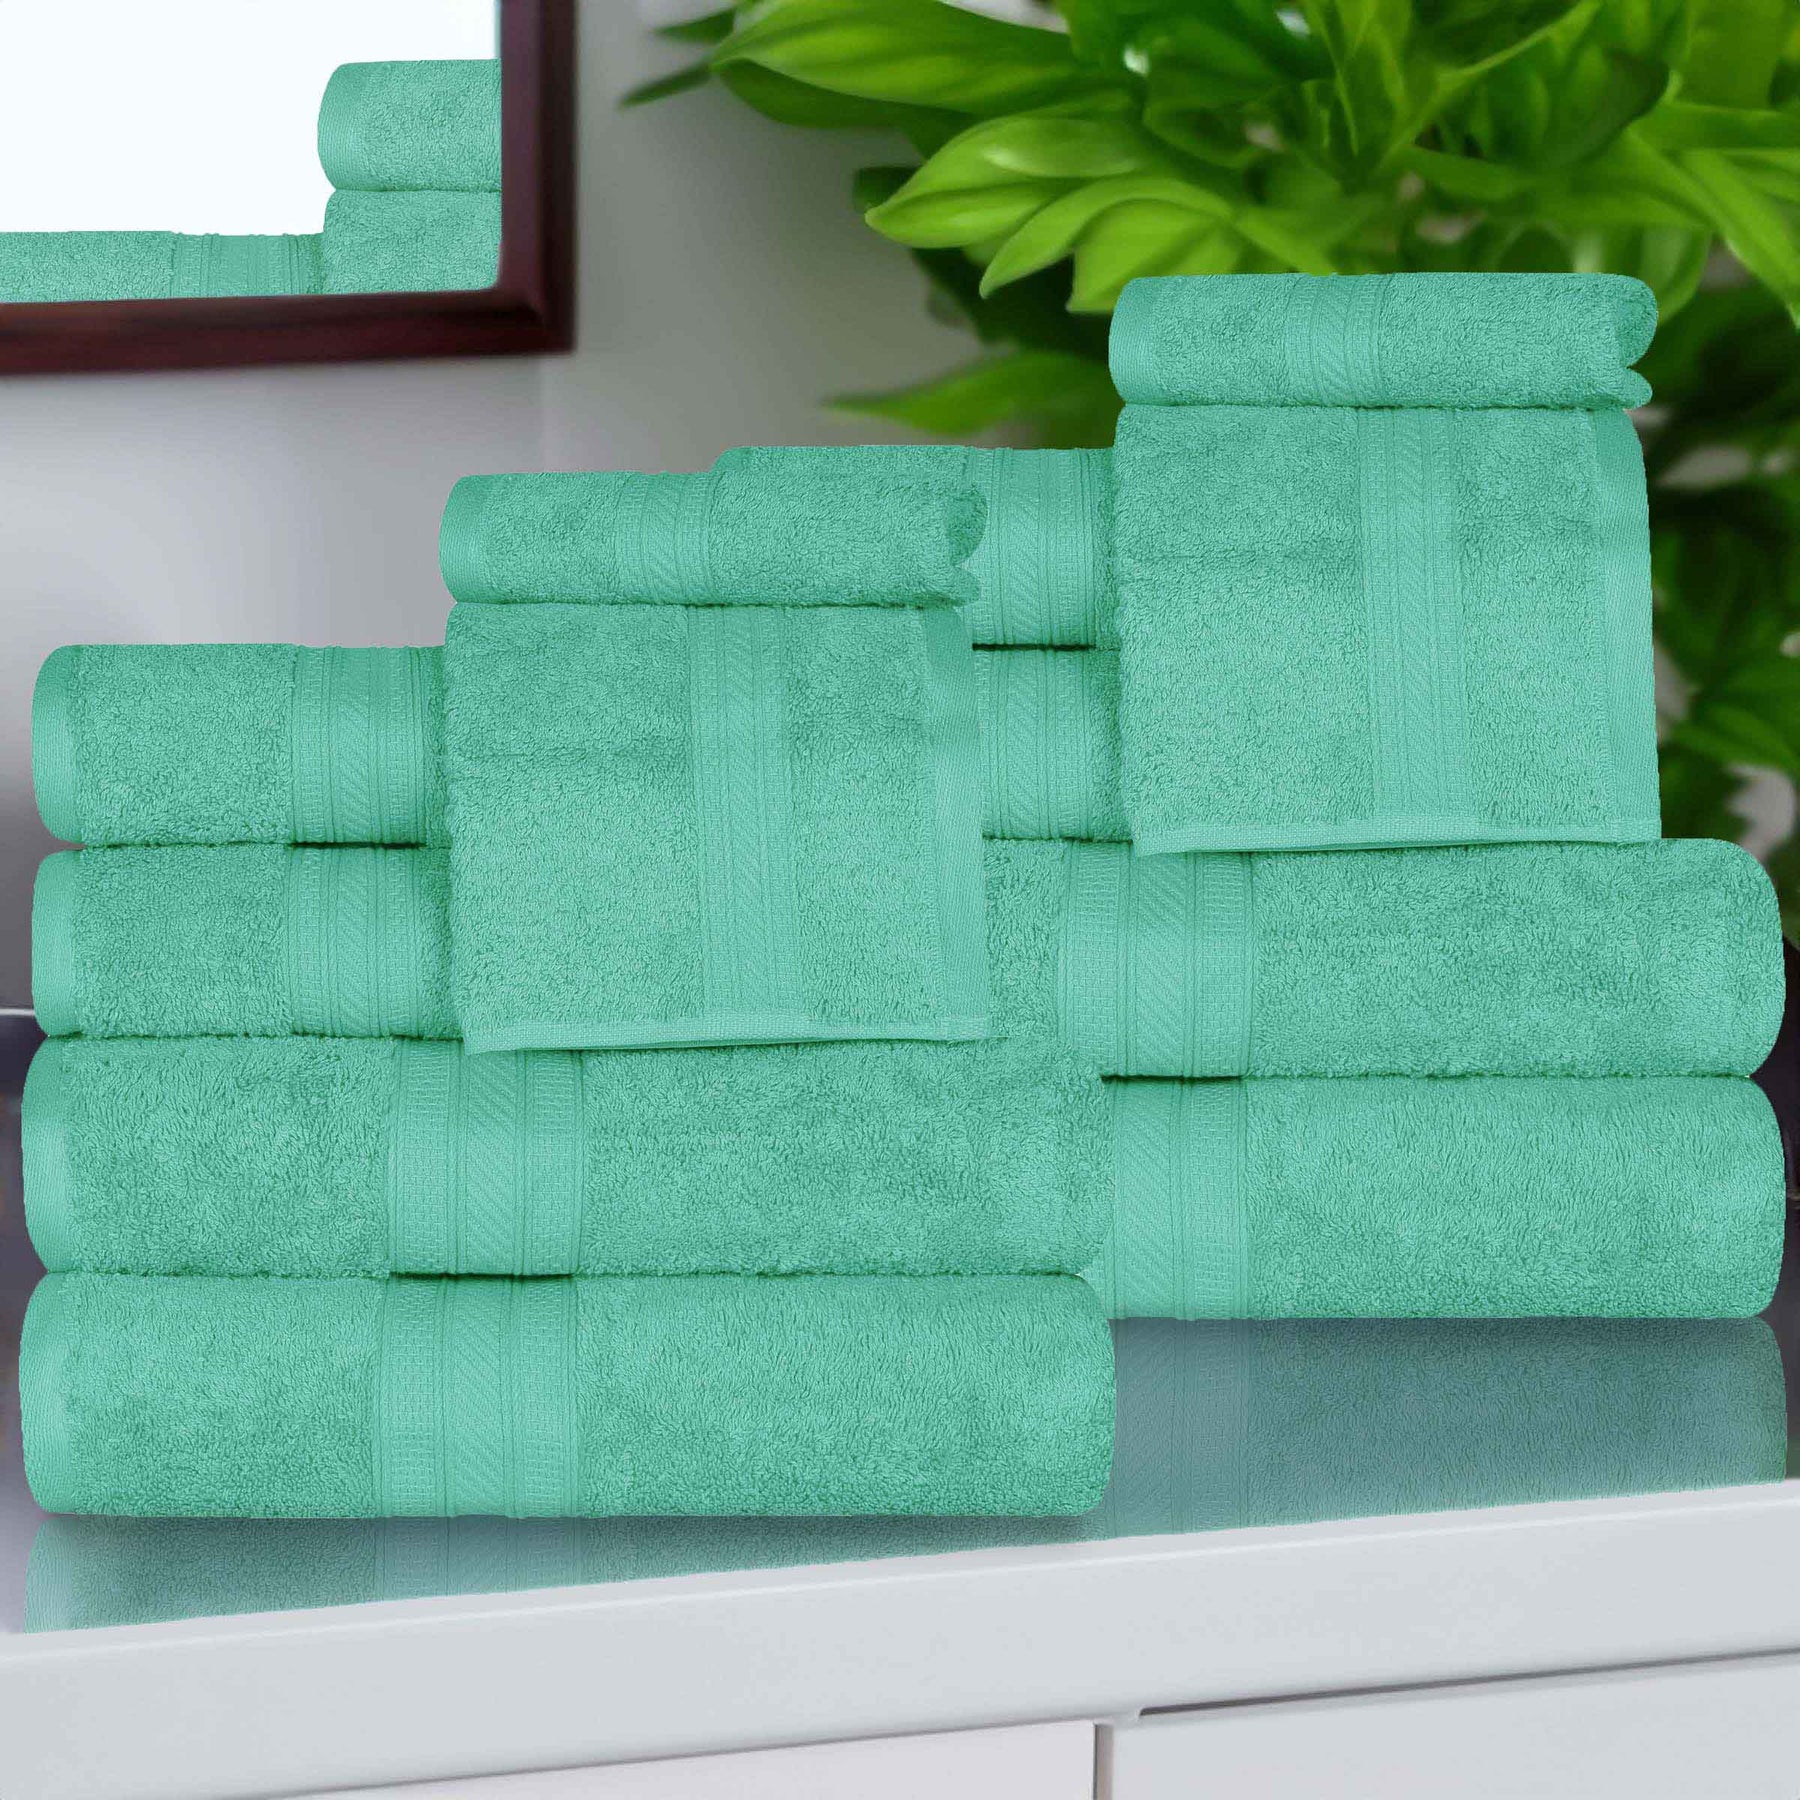 Atlas Combed Cotton Highly Absorbent Solid Face Towels / Washcloths - Rivulet